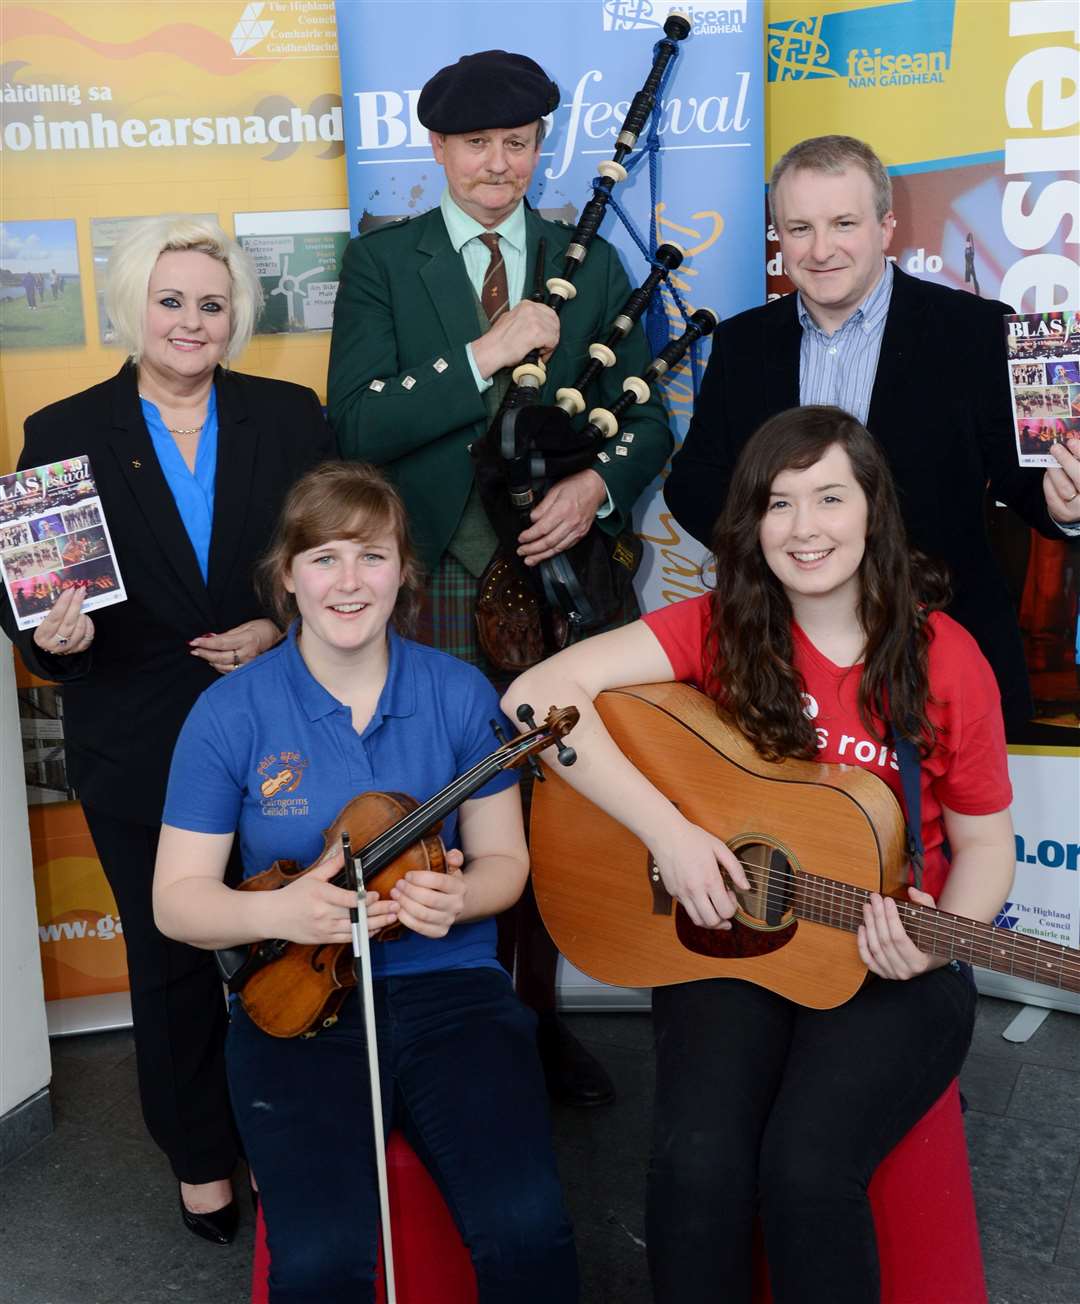 (back) Councillor Maxine Smith, piper Duncan MacGillivray and Arthur Cormack of Feisean nan Gaidheal .(front) Illona (correct) Kennedy of Feis Spey and Katie MacDonald of Feis Rois...BLAS festival launch..Picture: Alison White. Image No.024898.